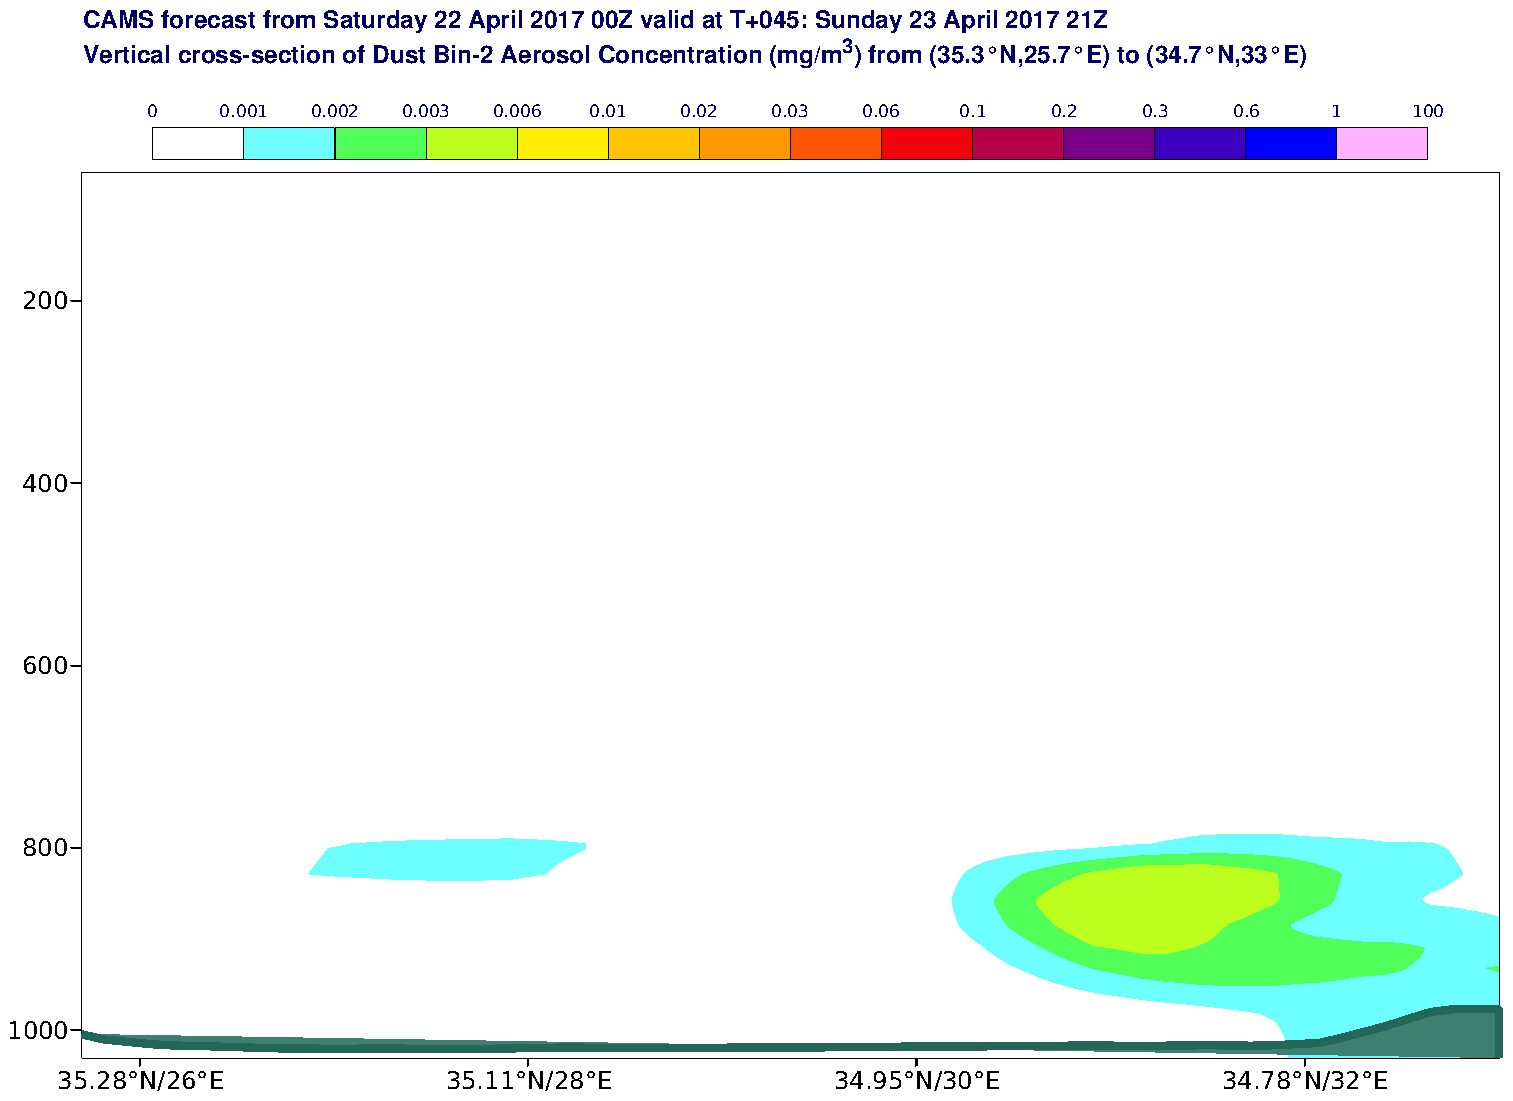 Vertical cross-section of Dust Bin-2 Aerosol Concentration (mg/m3) valid at T45 - 2017-04-23 21:00